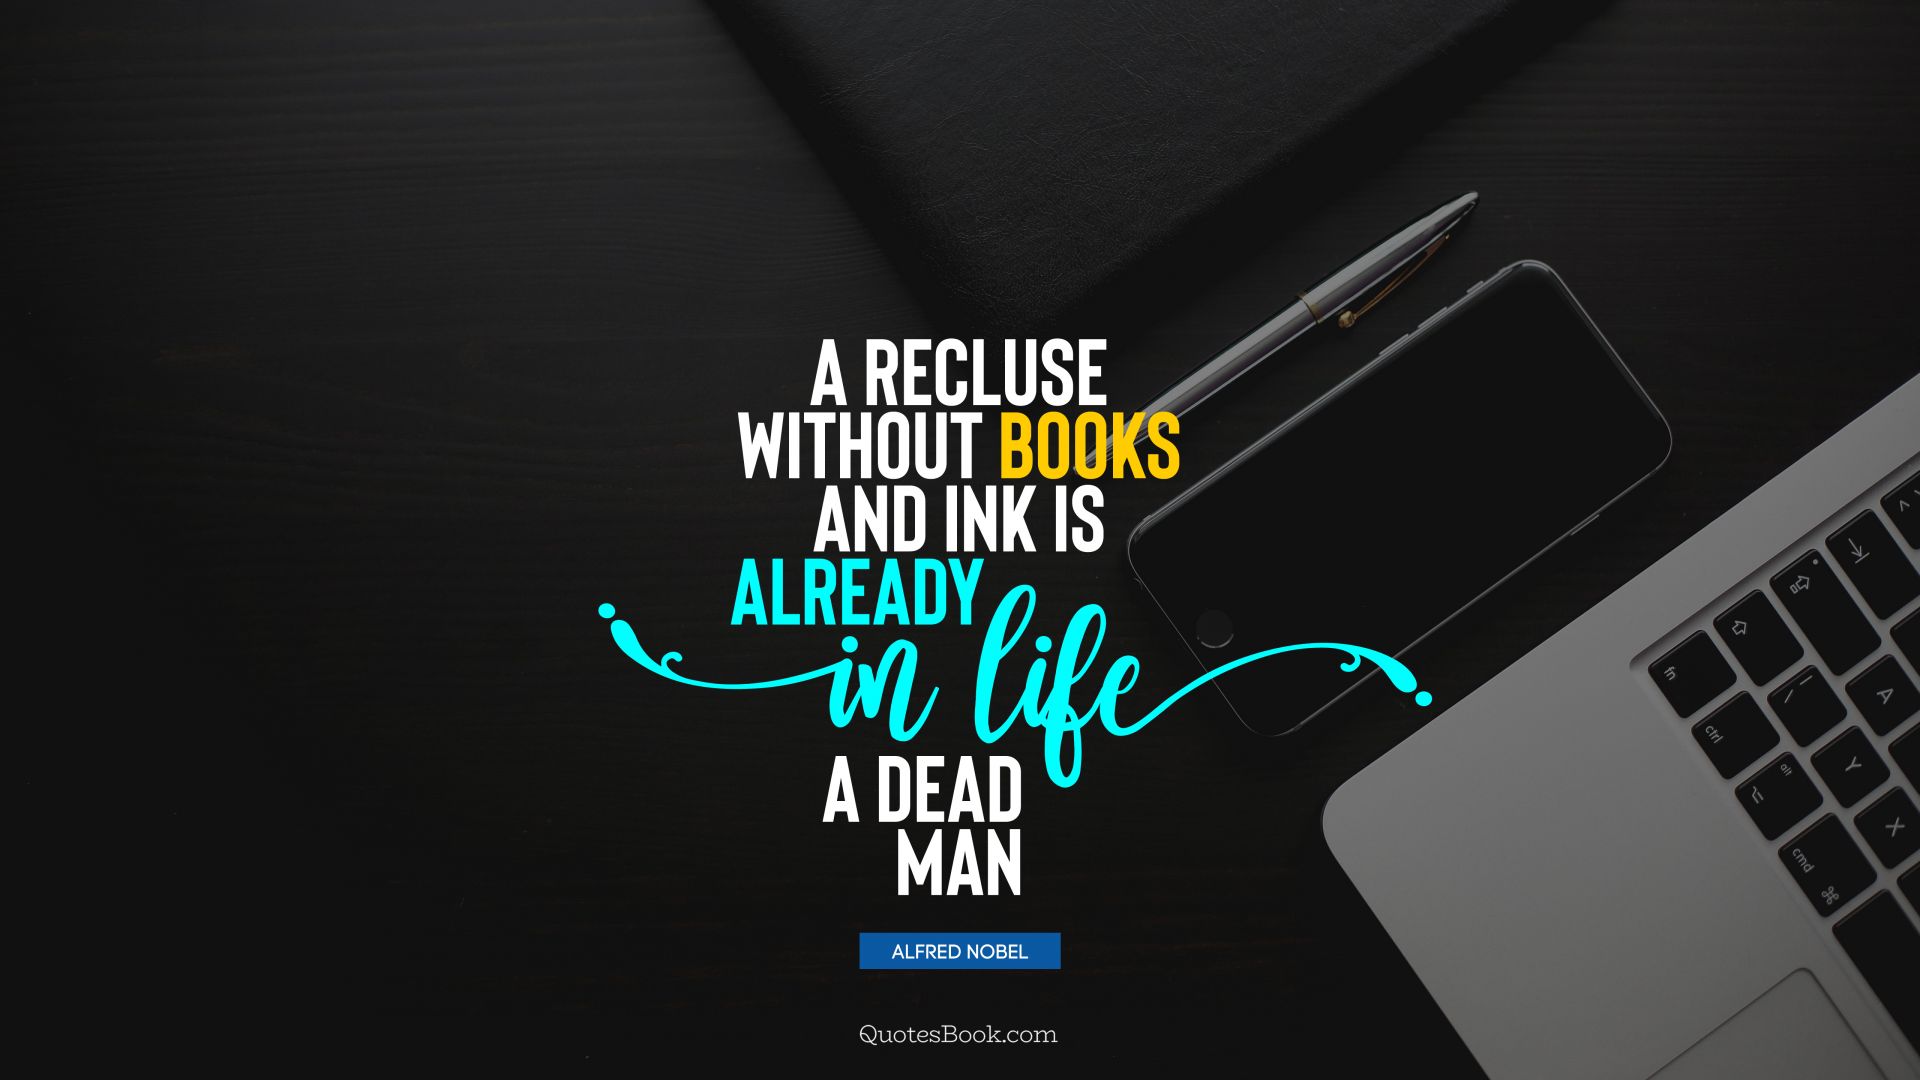 A recluse without books and ink is already in life a dead man. - Quote by Alfred Nobel